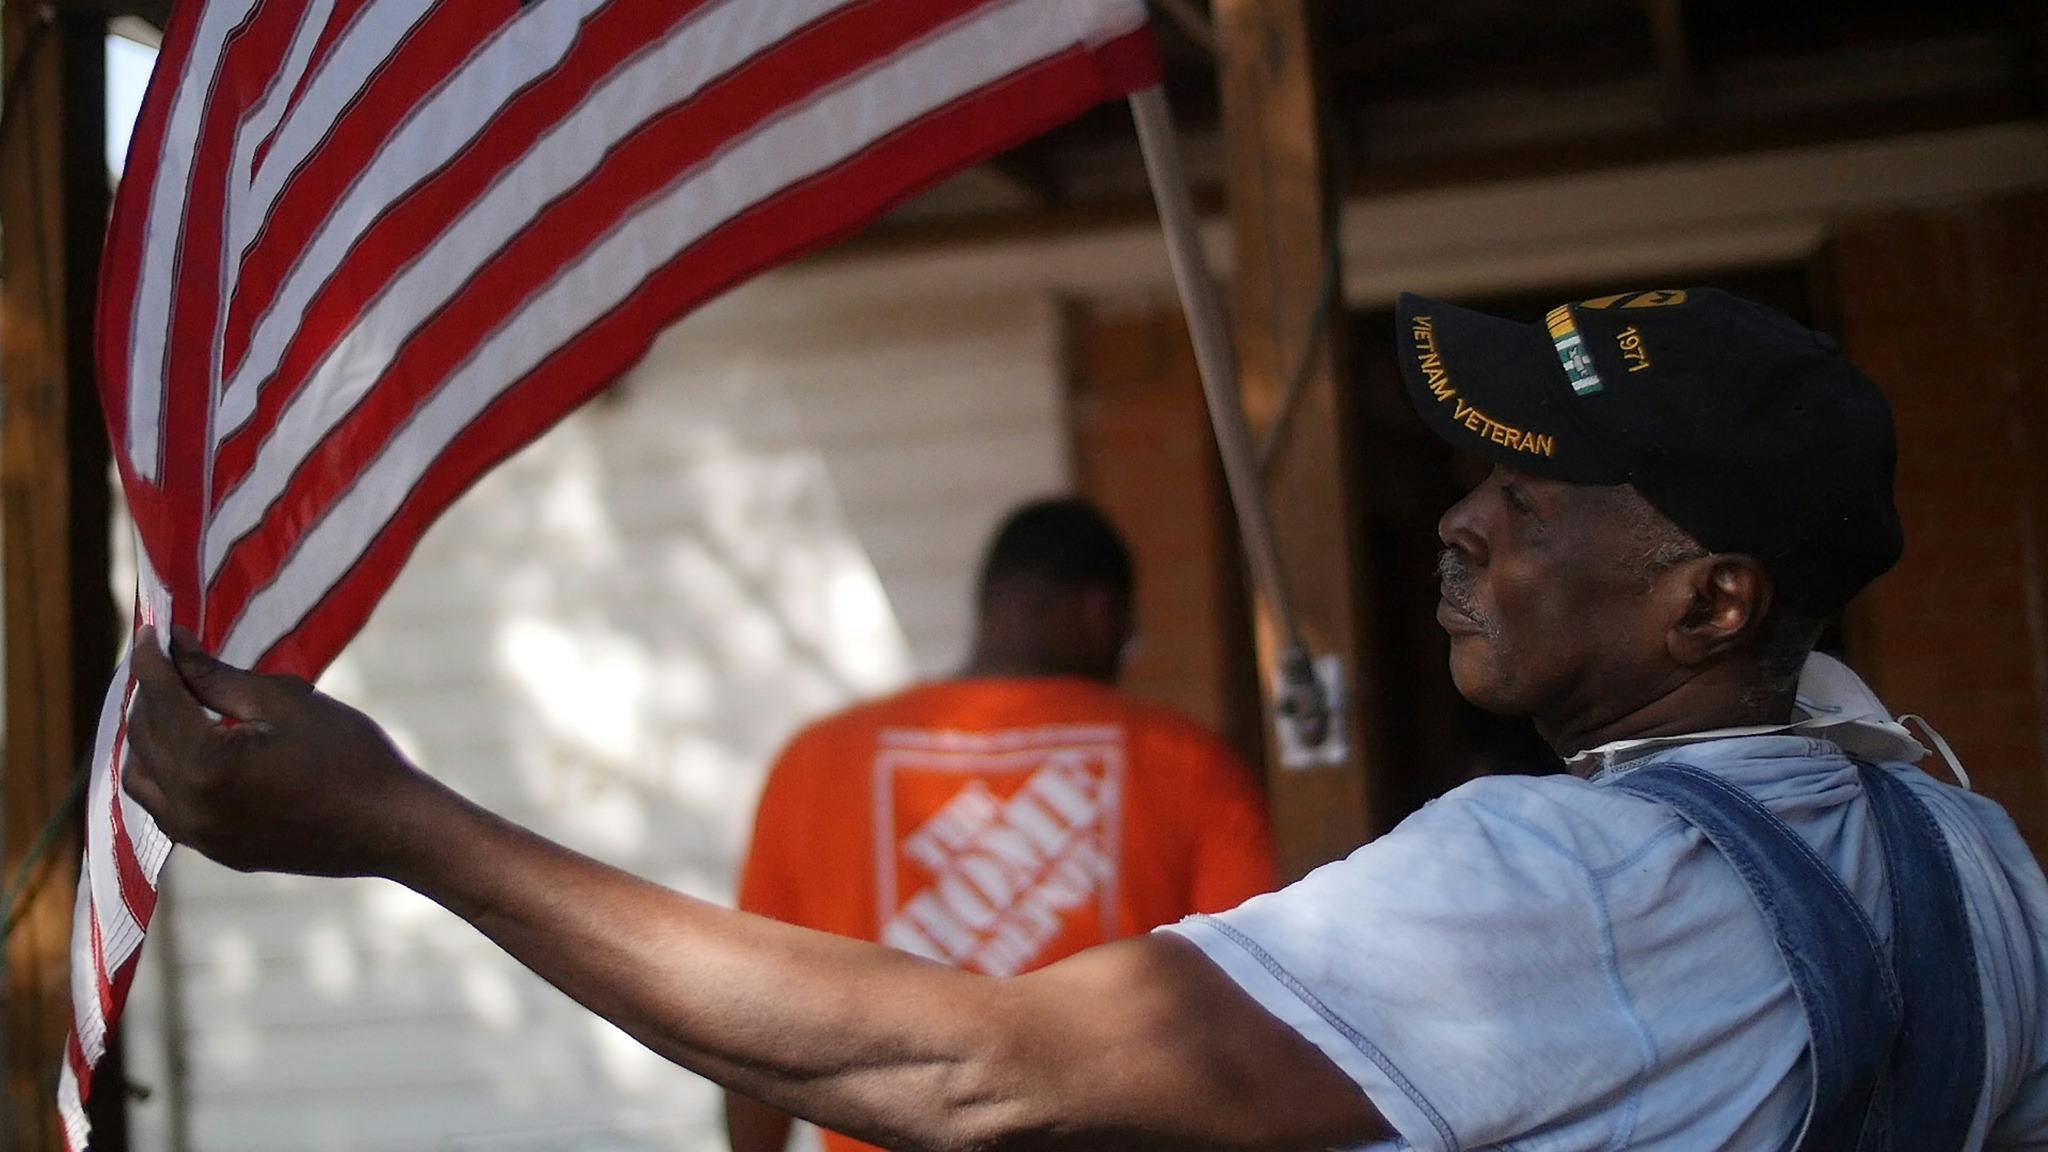 A veteran holding an American flag in front of someone wearing a Home Depot shirt